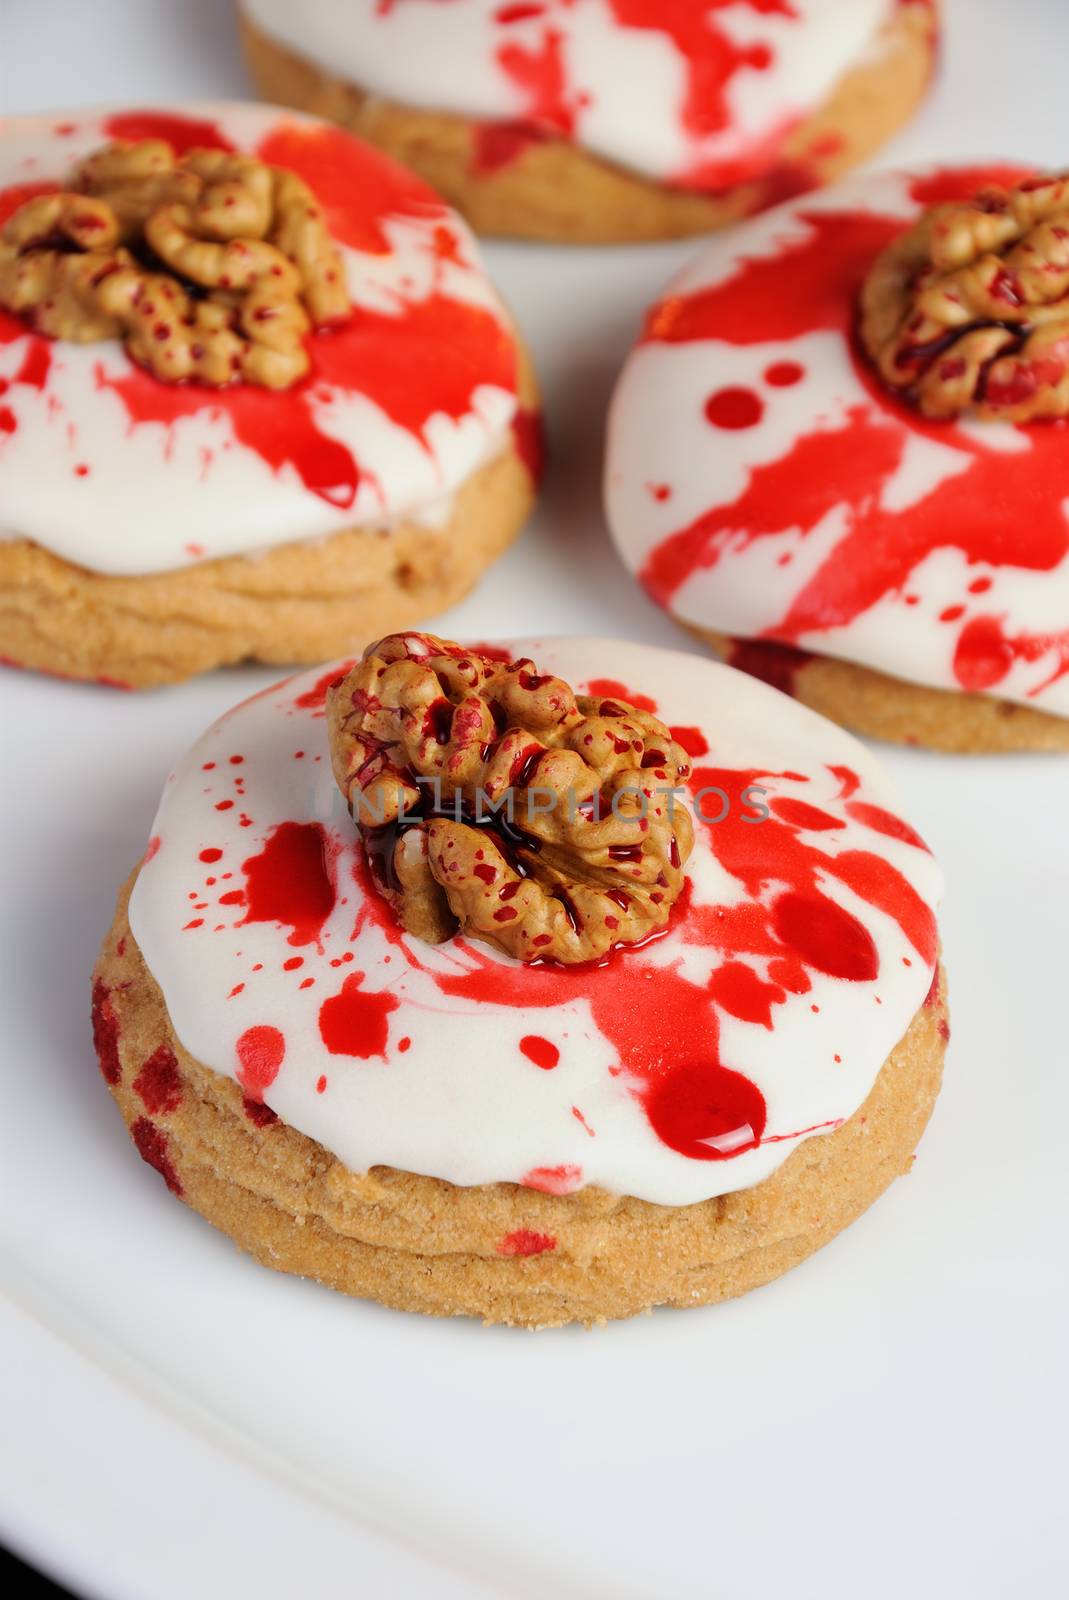 Cookies in white glaze drip blood and walnuts